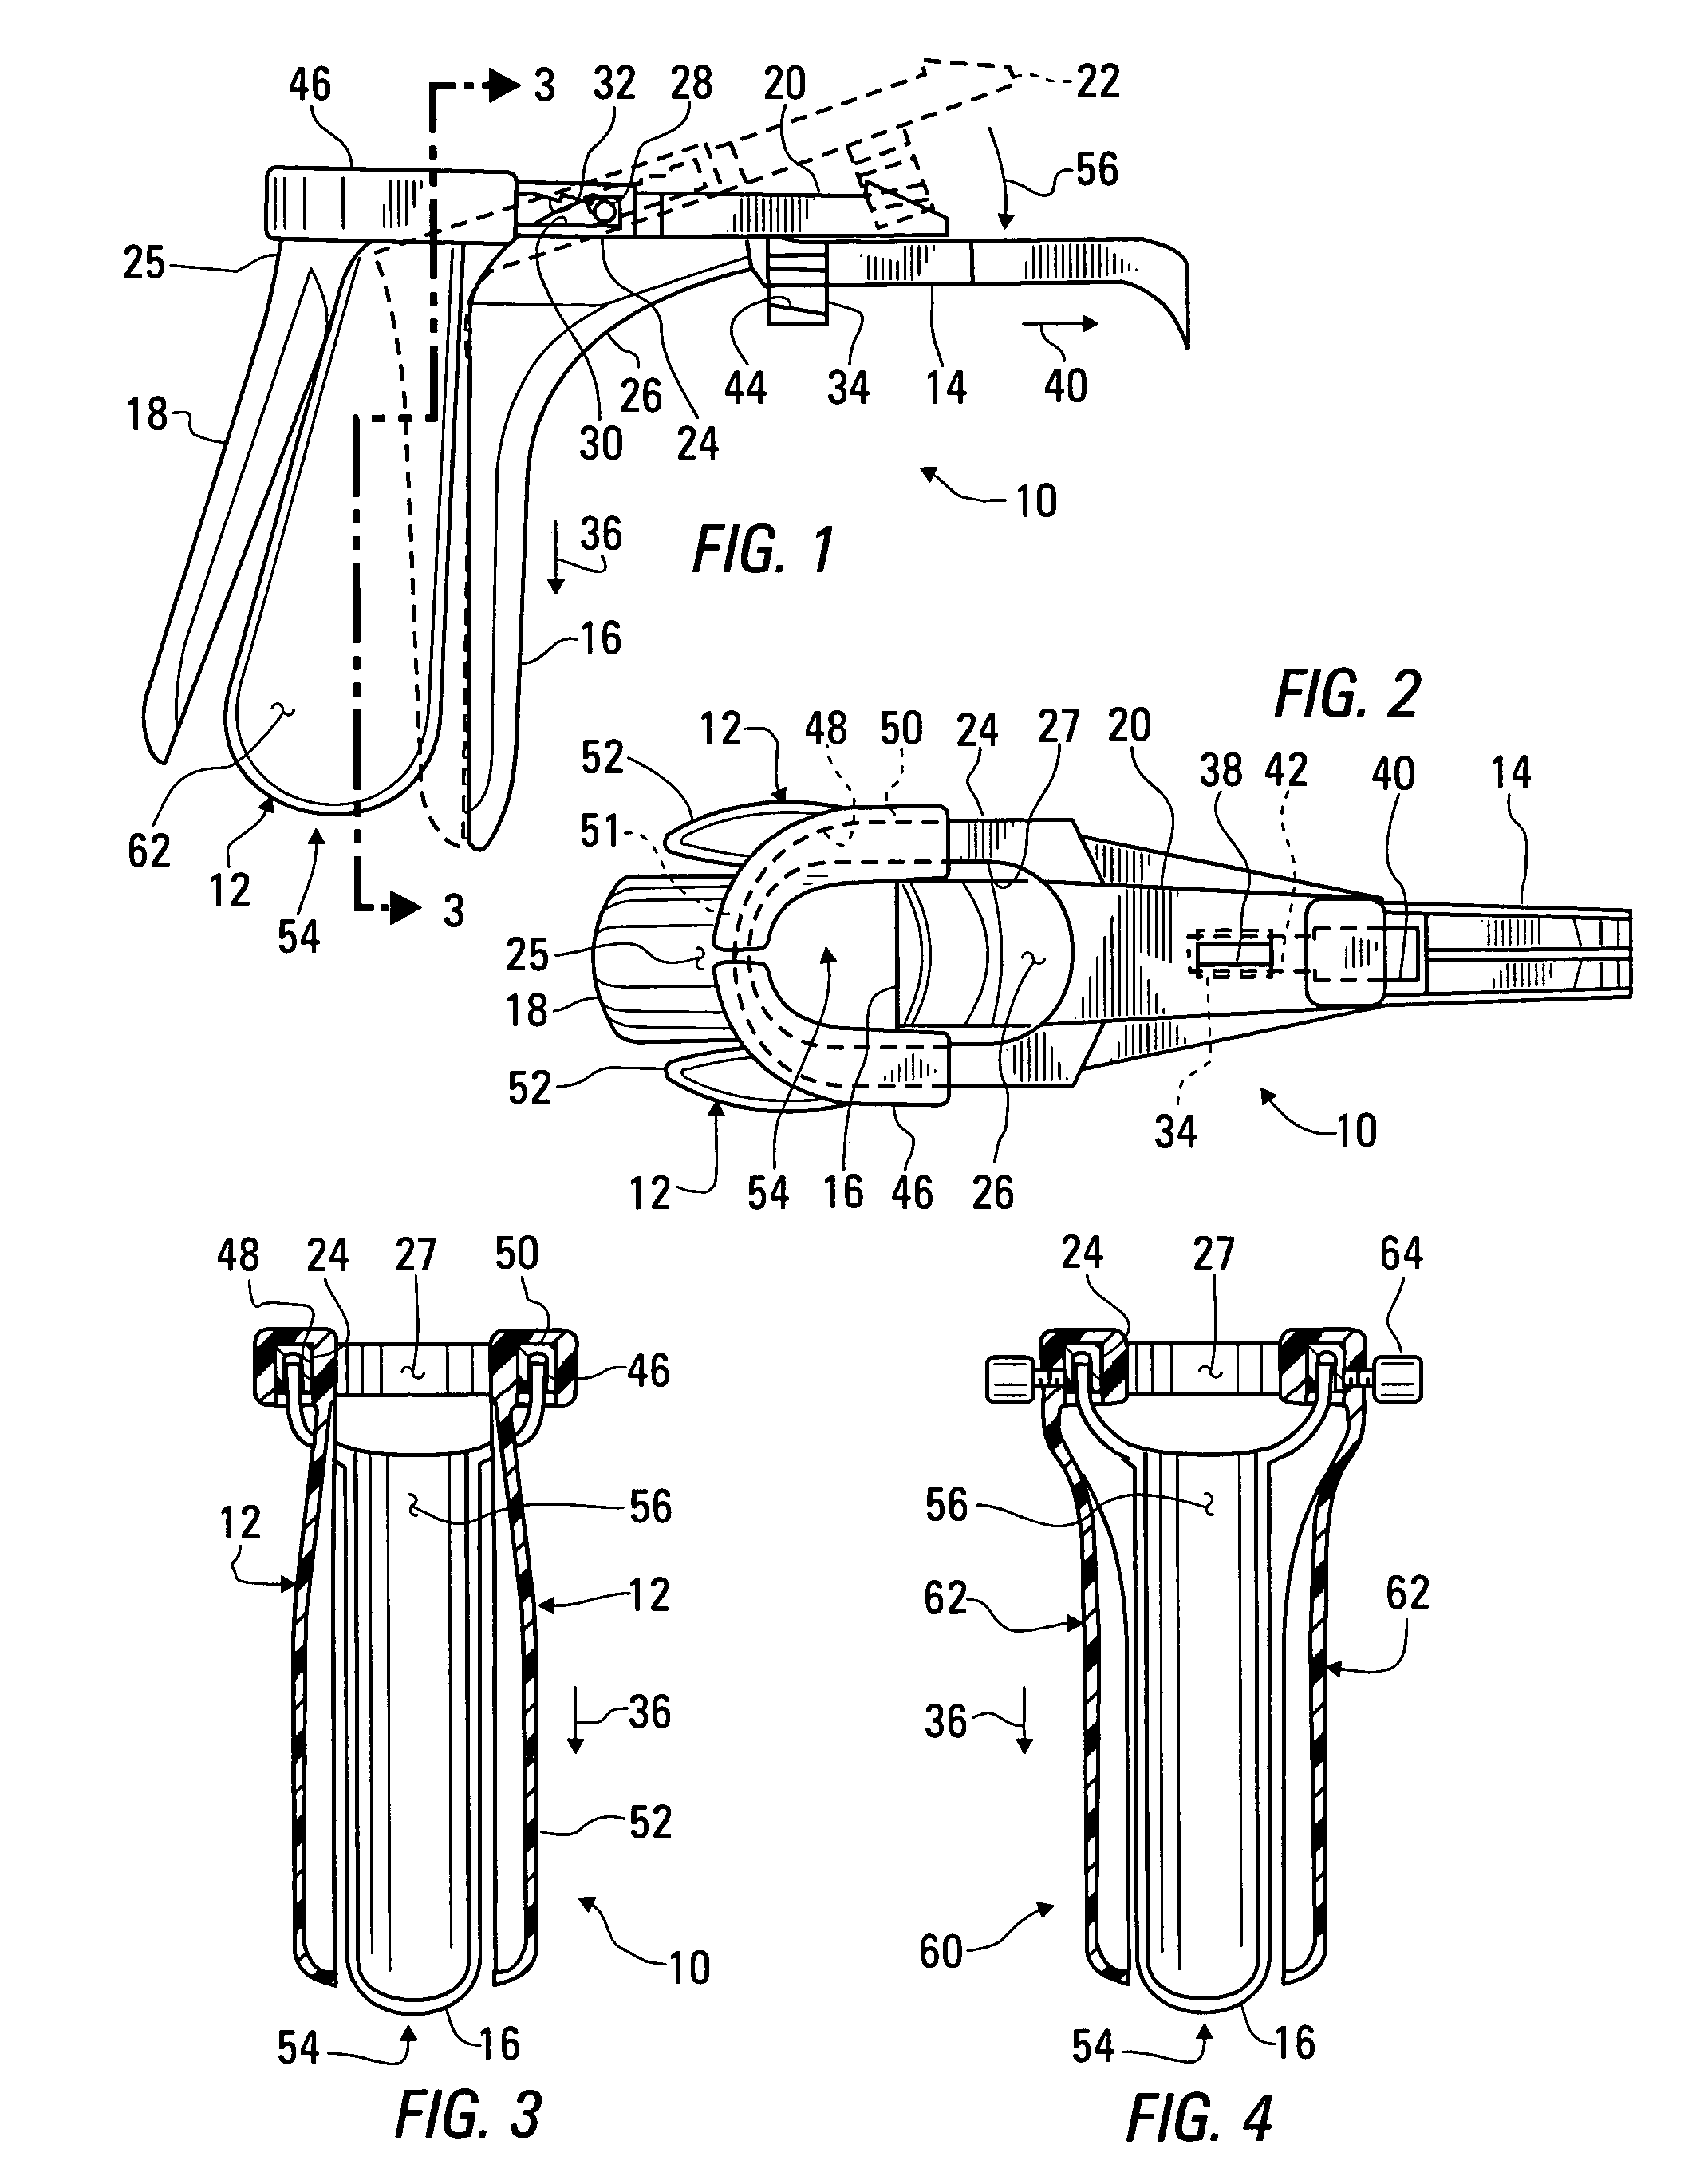 Speculum with attachable blades for lateral wall retraction